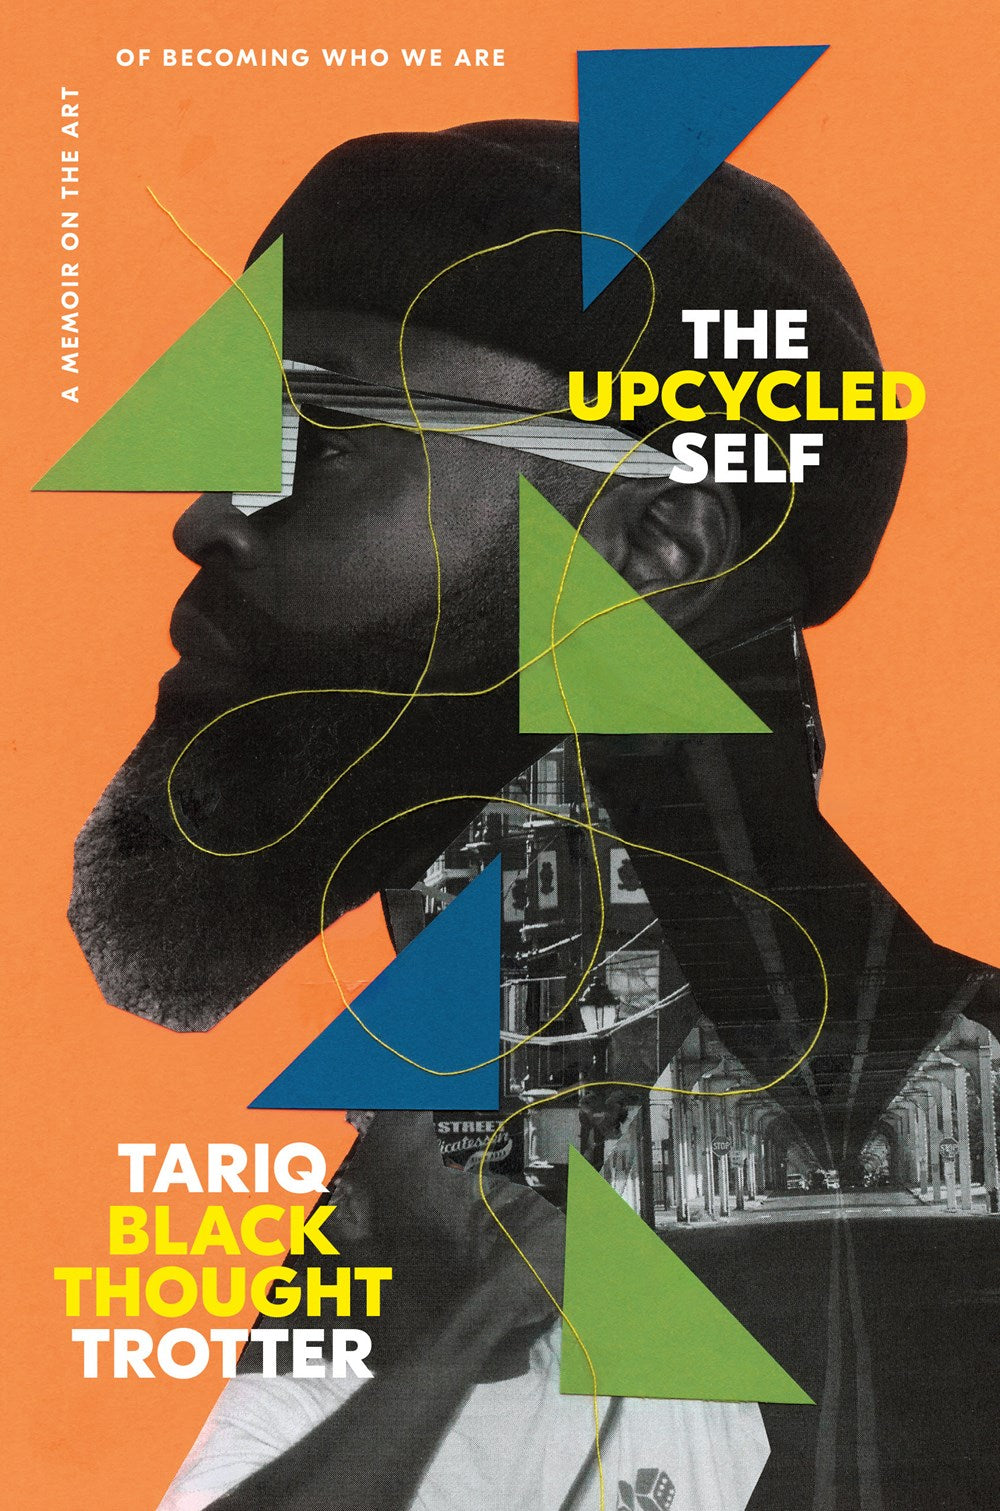 The Upcycled Self: A Memoir on the Art of Becoming Who We Are by Tariq Trotter (Hardcover)